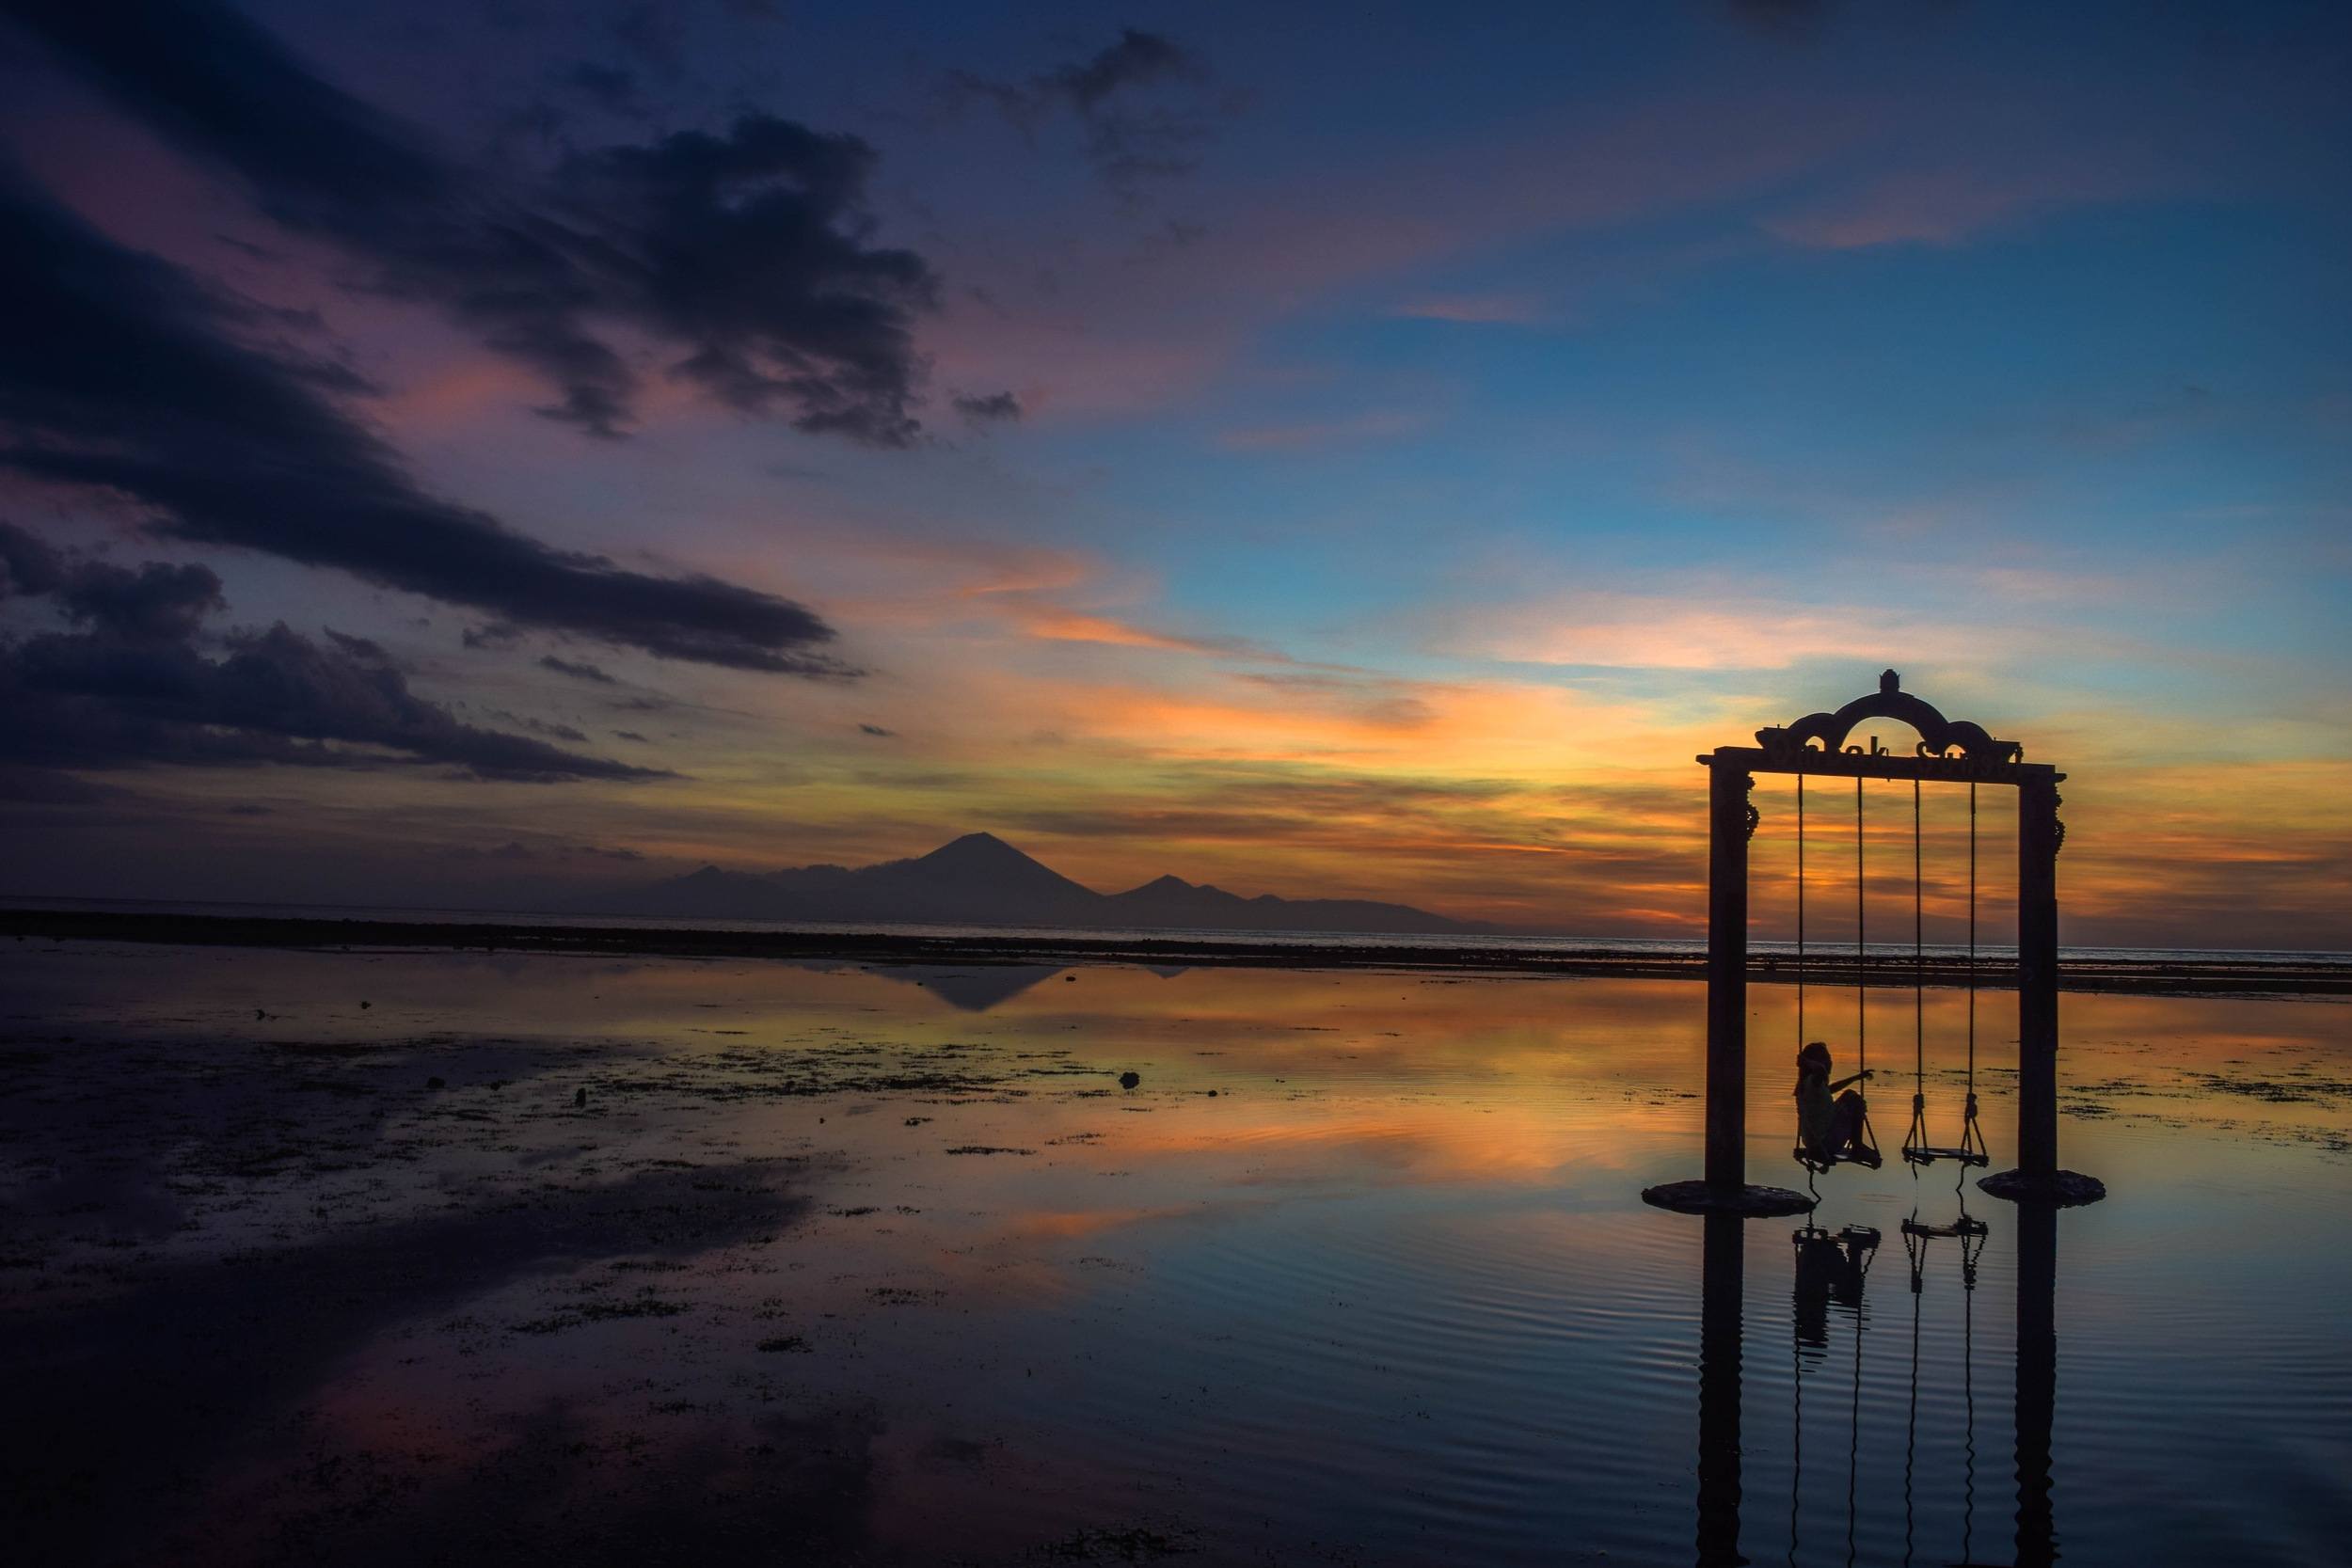 Gili Islands Sunset - Planning a Trip to Bali